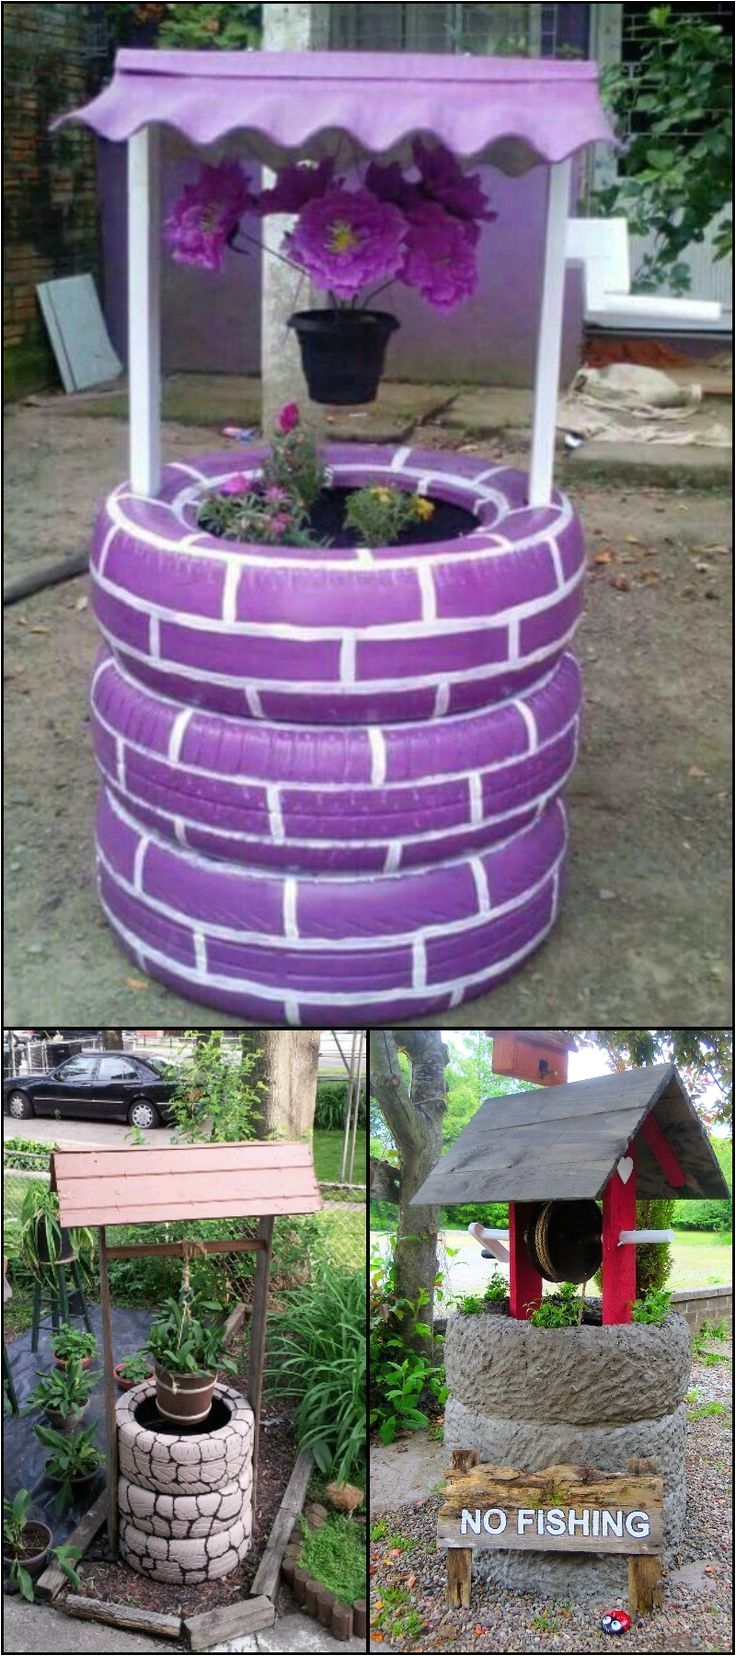 make a wish in your own garden with this wishing well planter made from recycled tires it makes a great garden decor and it s so easy to make you can